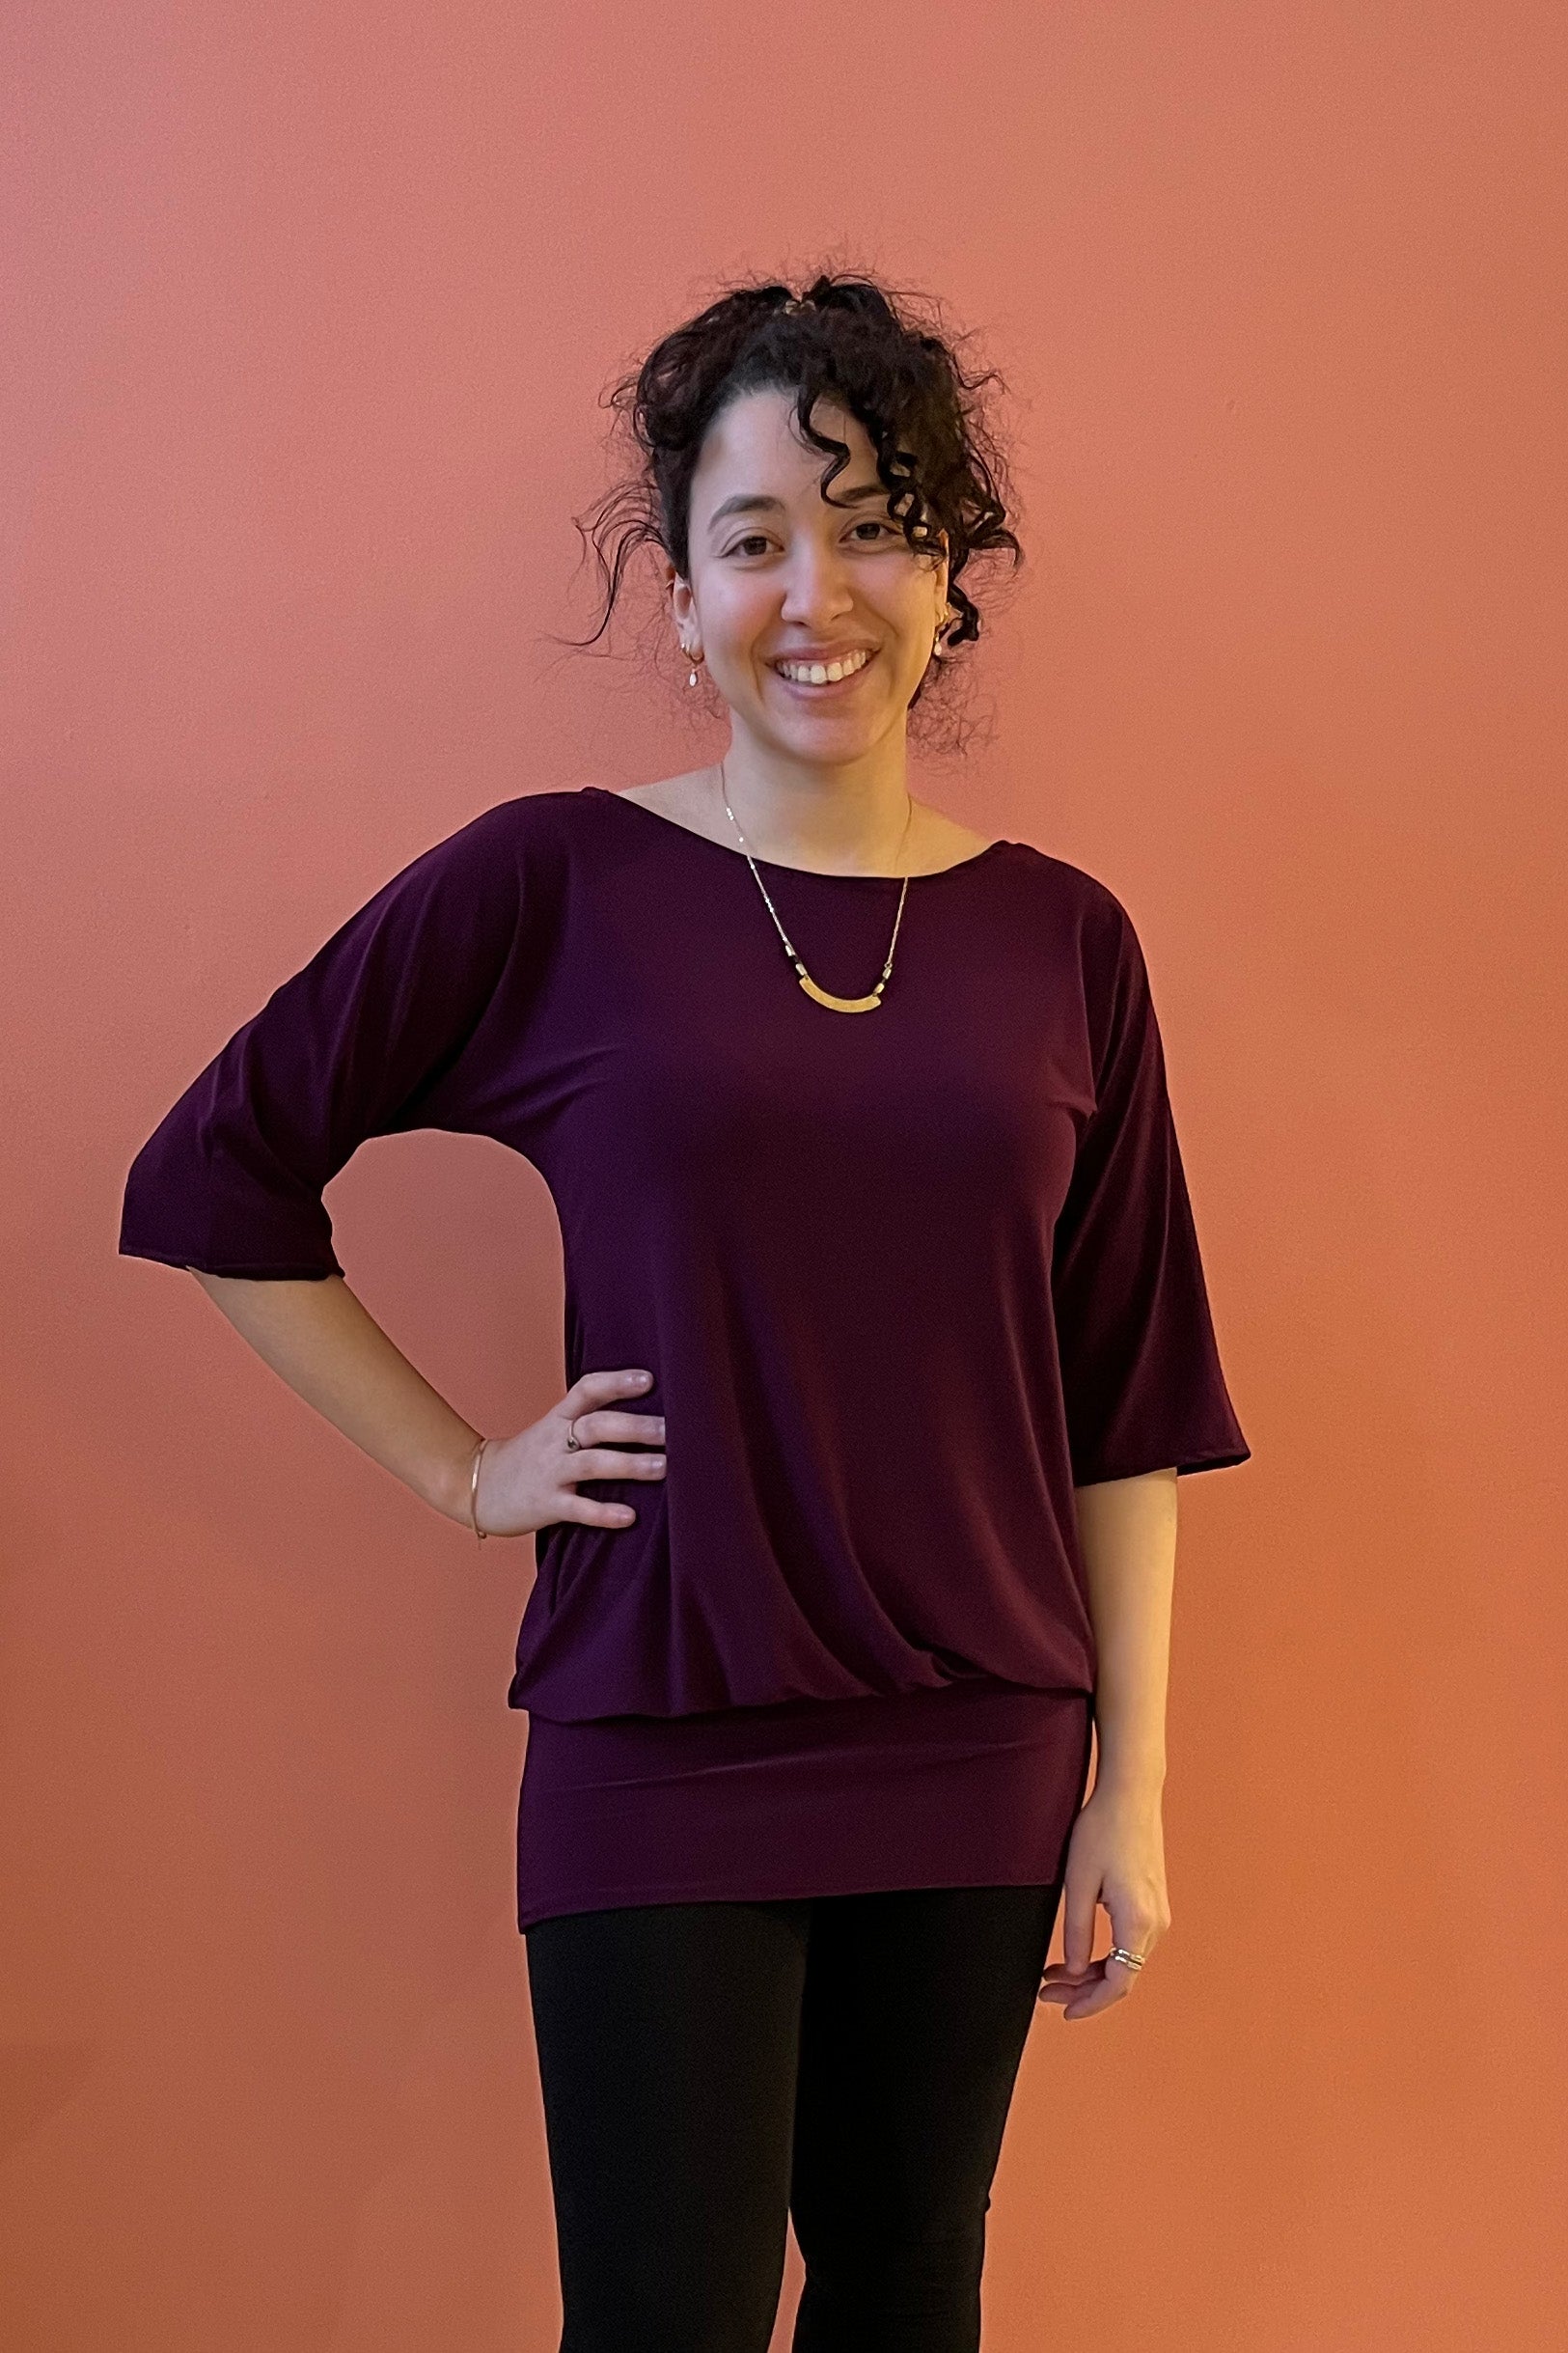 Kafta Top by SI Design, Dark Mauve, wide neck, 3/4 sleeves, wide band at hem, sizes XS to XL, made in Quebec